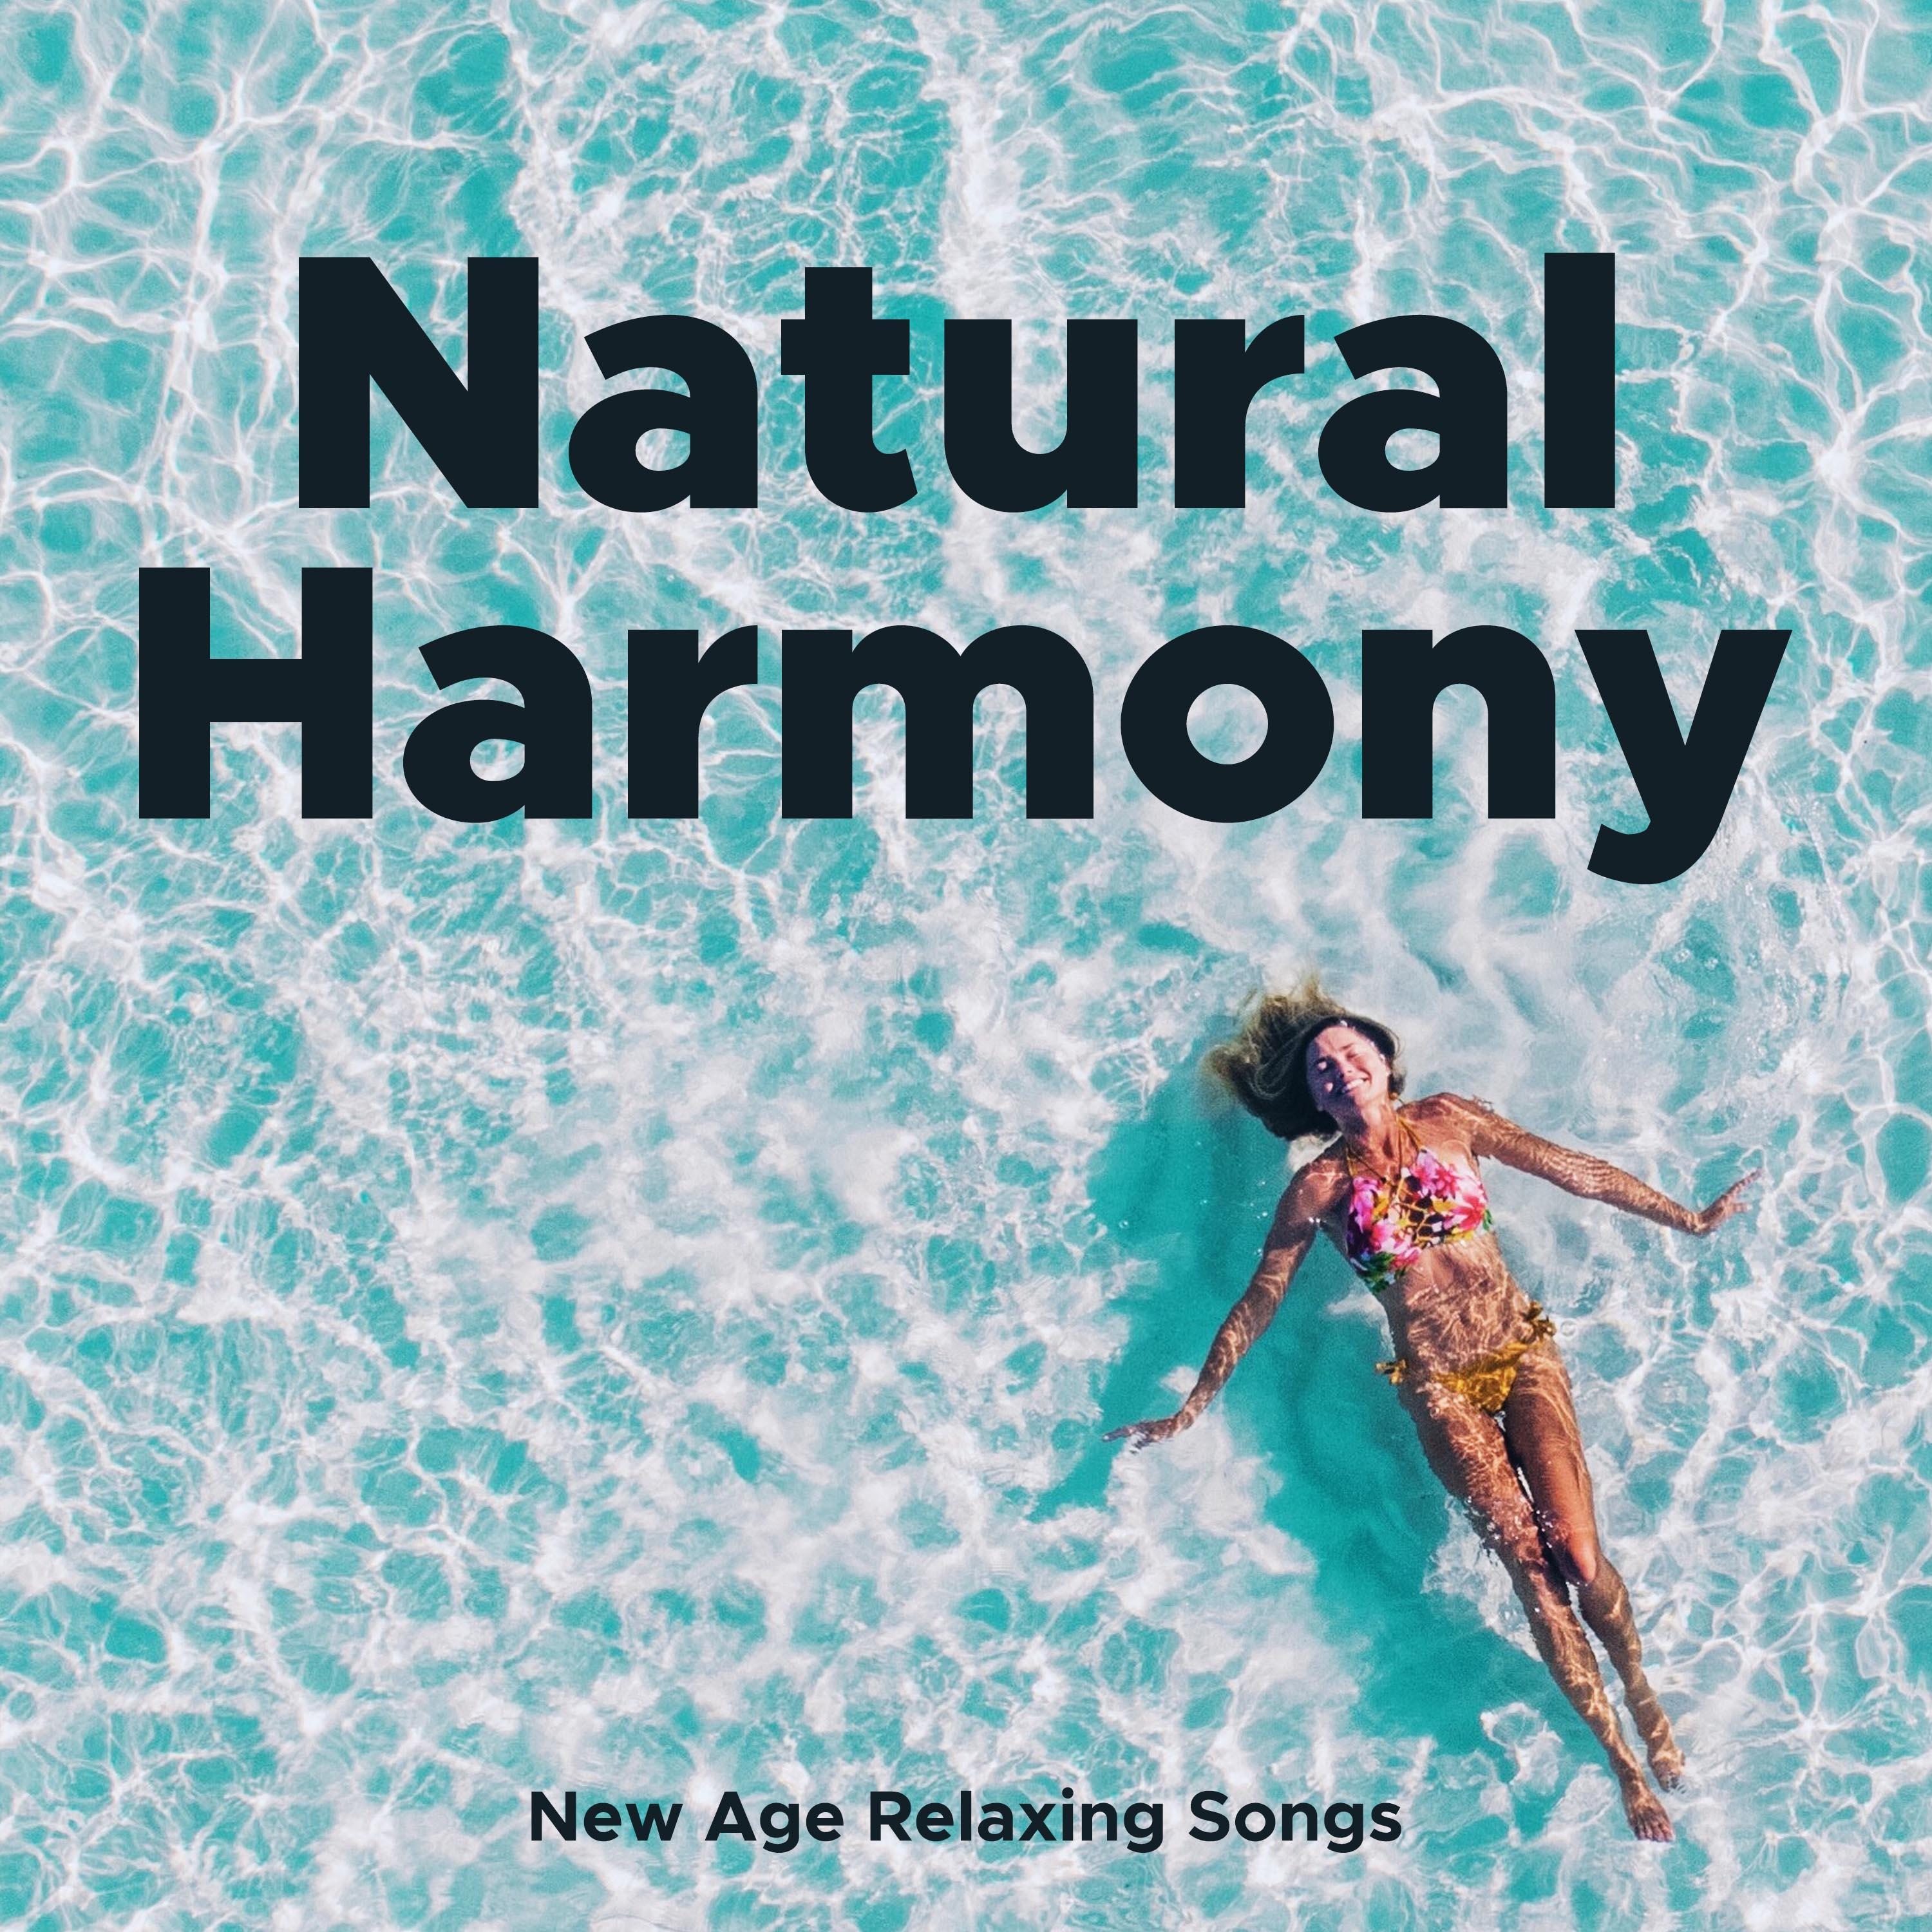 Natural Harmony - New Age Relaxing Songs and Chakra Balancing for Spirituality